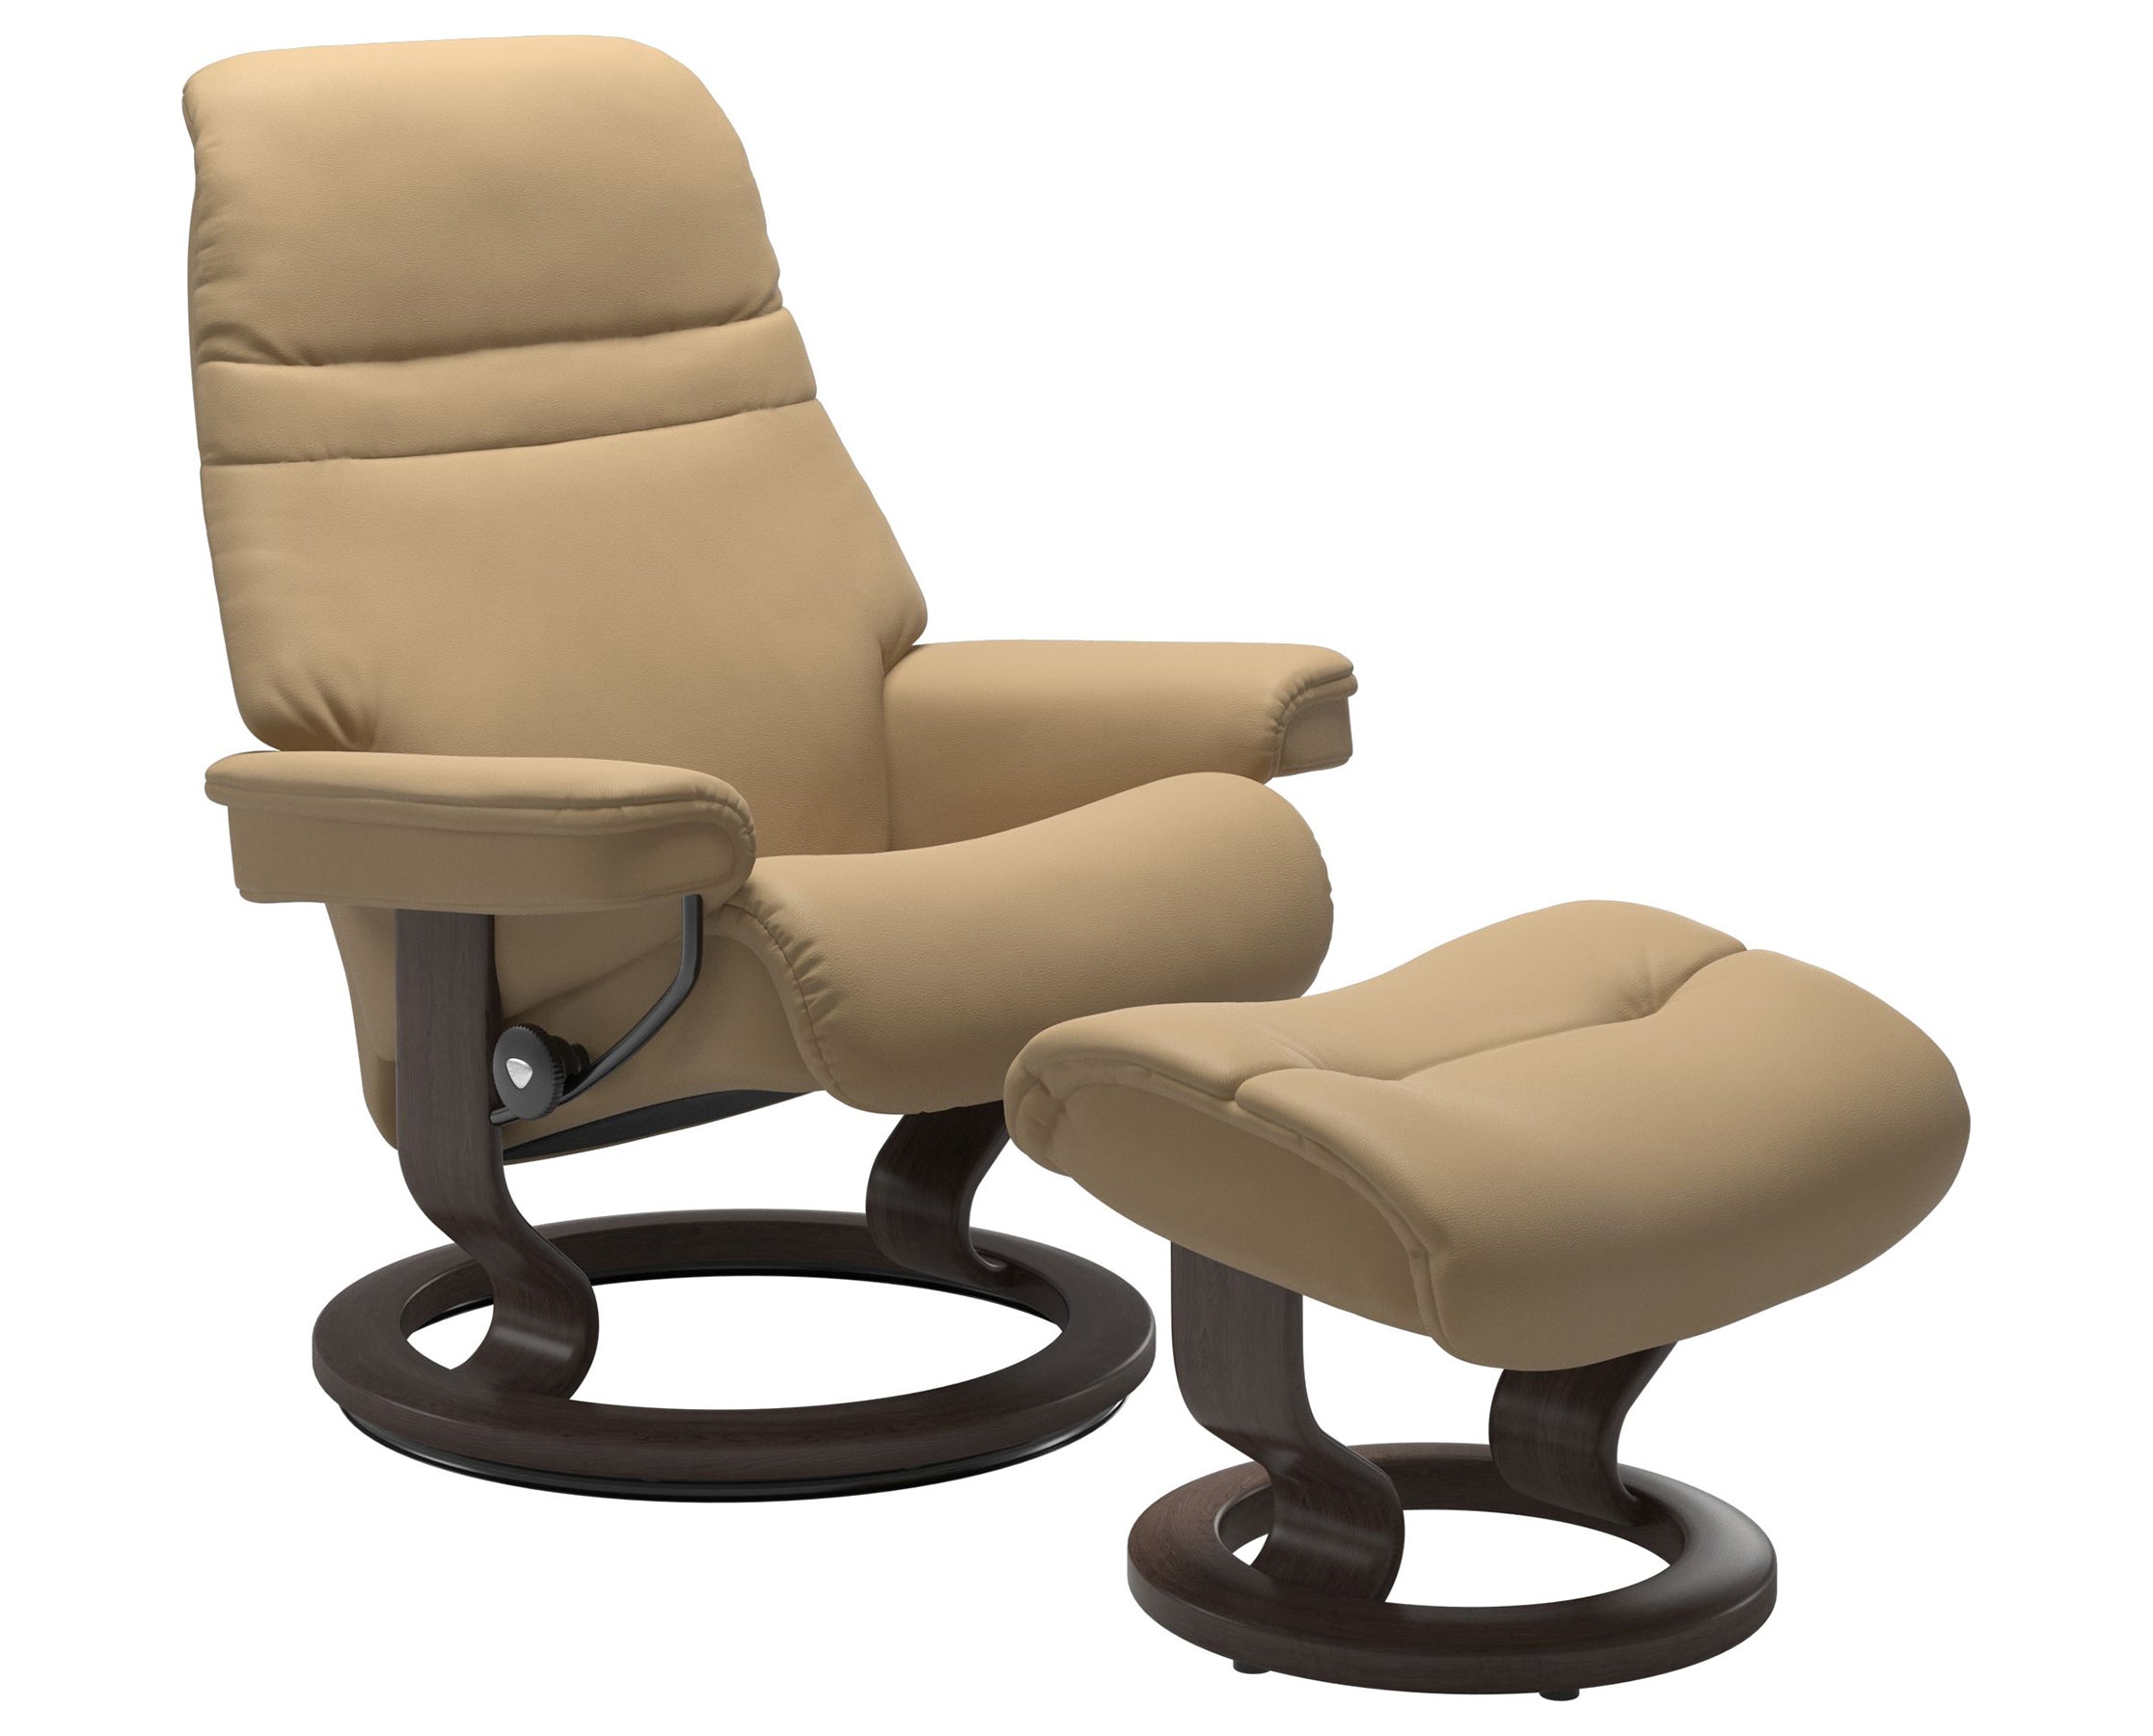 Paloma Leather Sand S/M/L and Wenge Base | Stressless Sunrise Classic Recliner | Valley Ridge Furniture